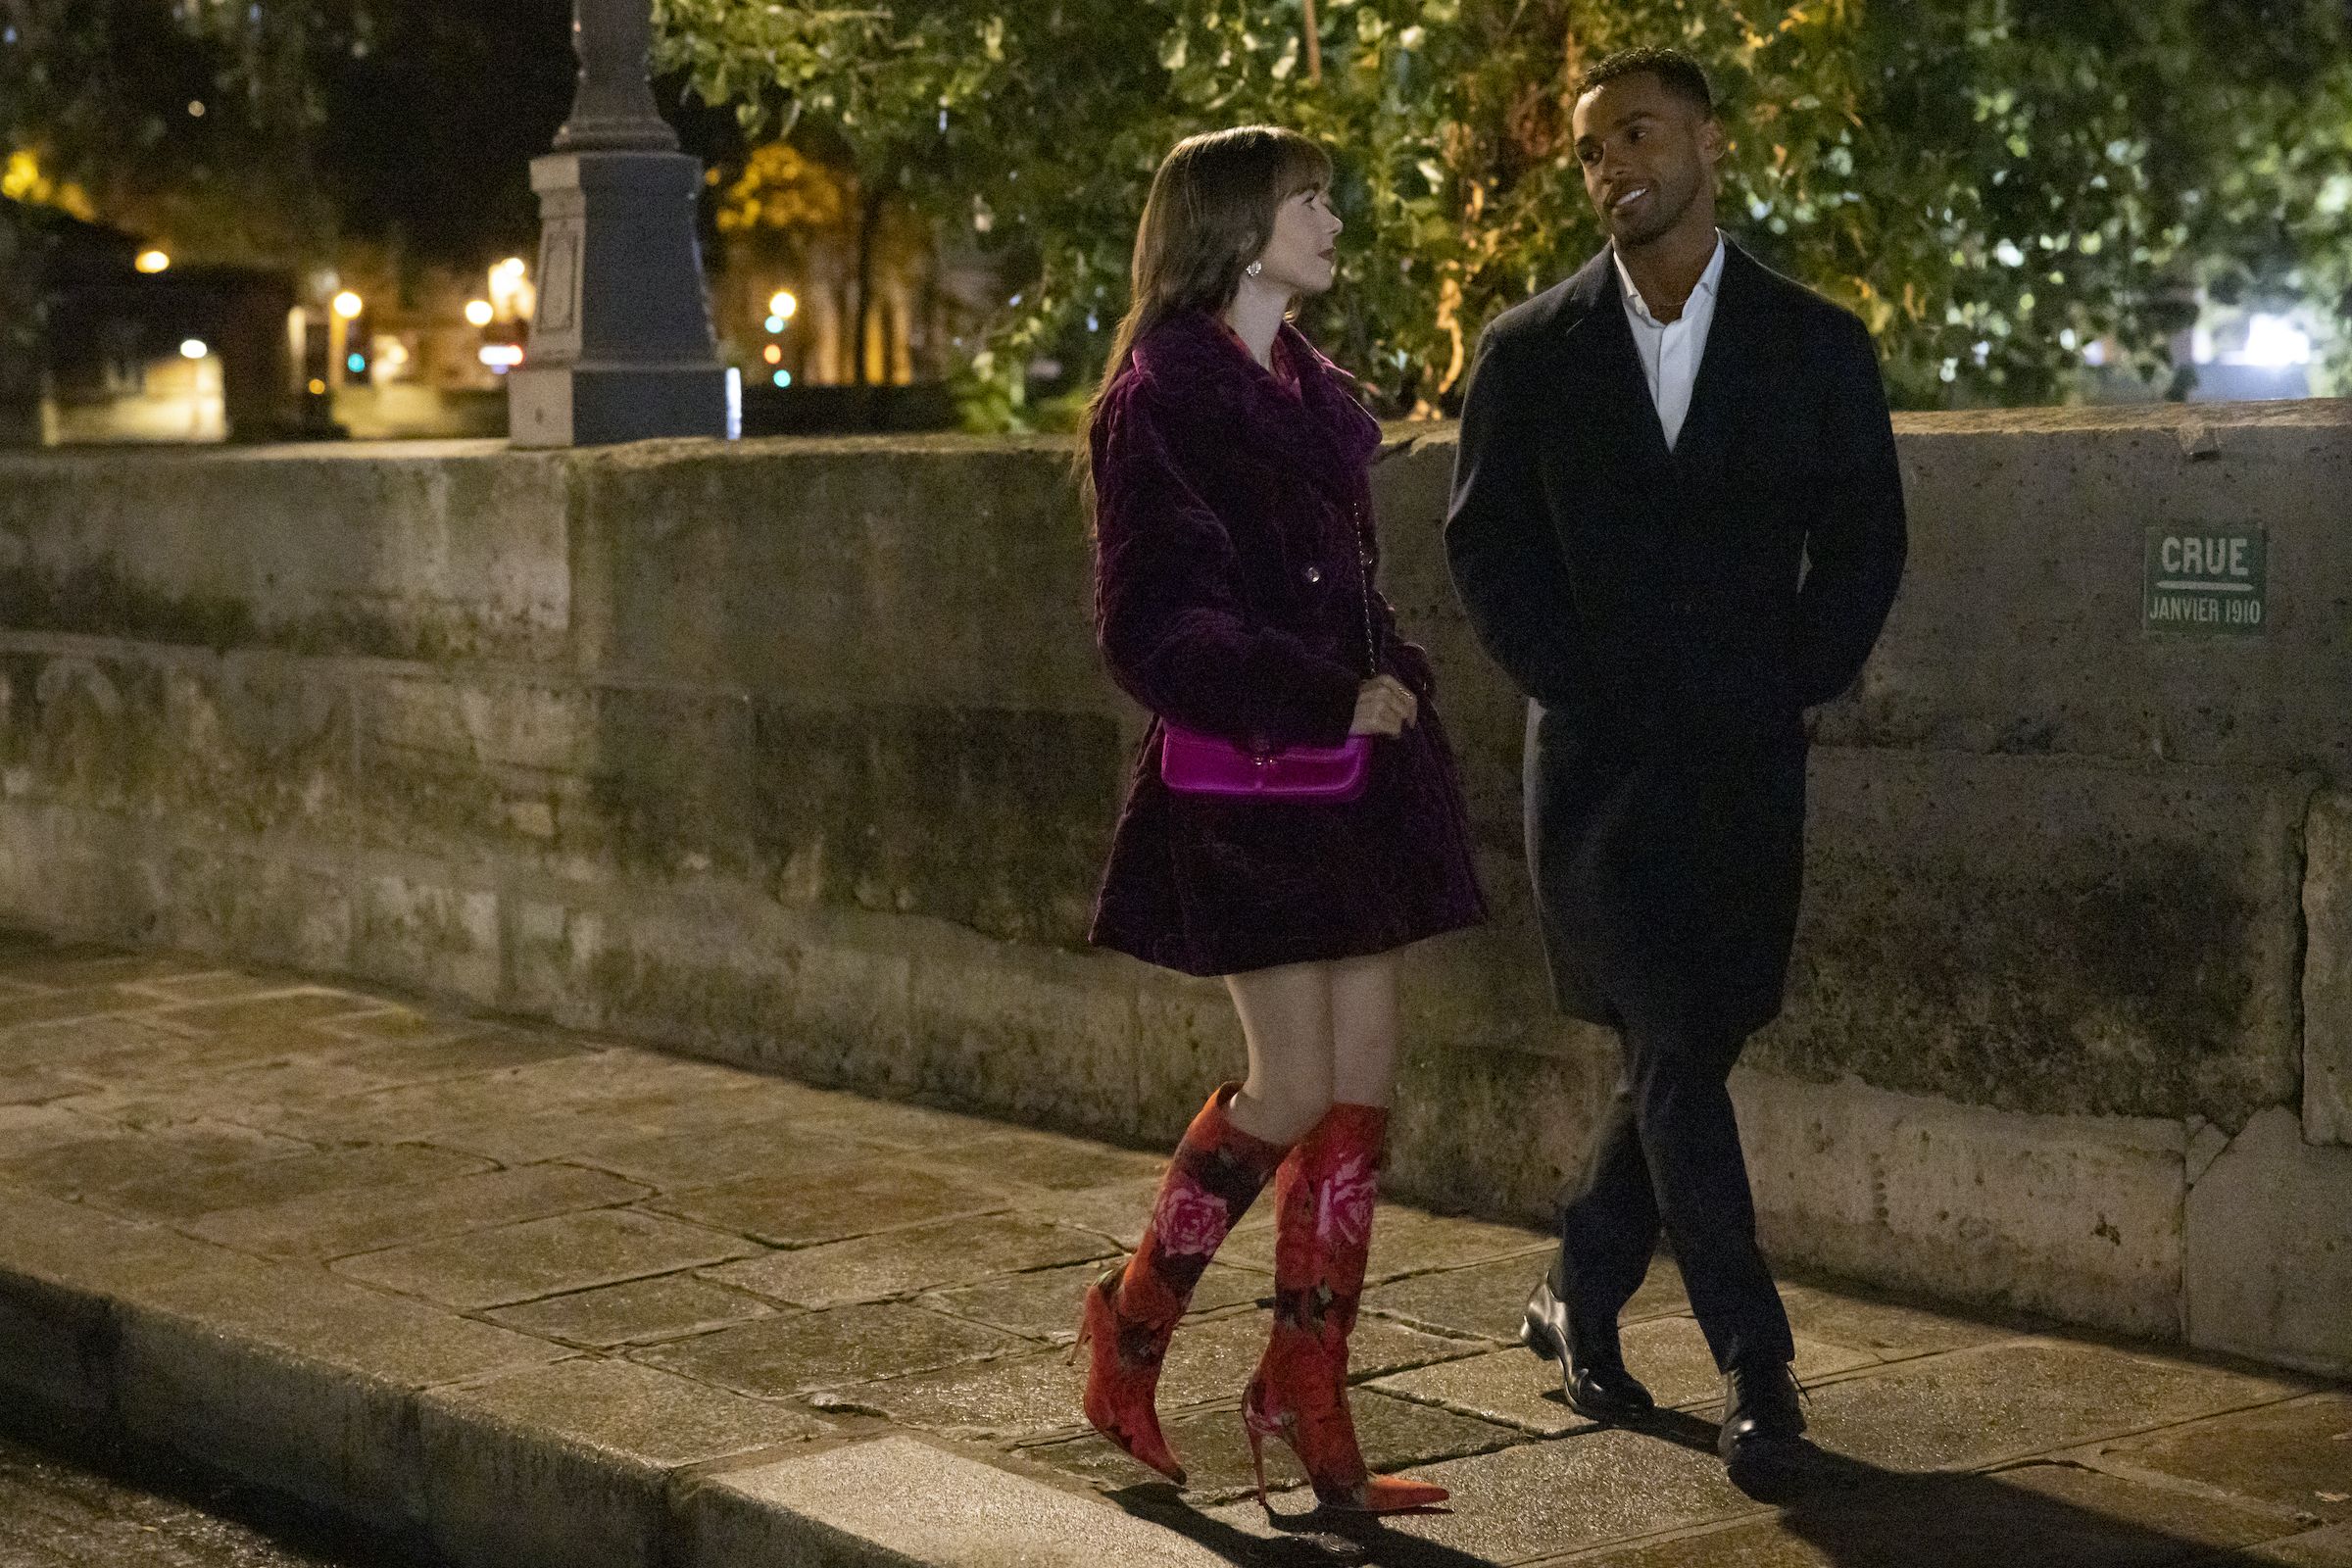 Emily in Paris Season 4: Cast, Release Date, Trailer, and